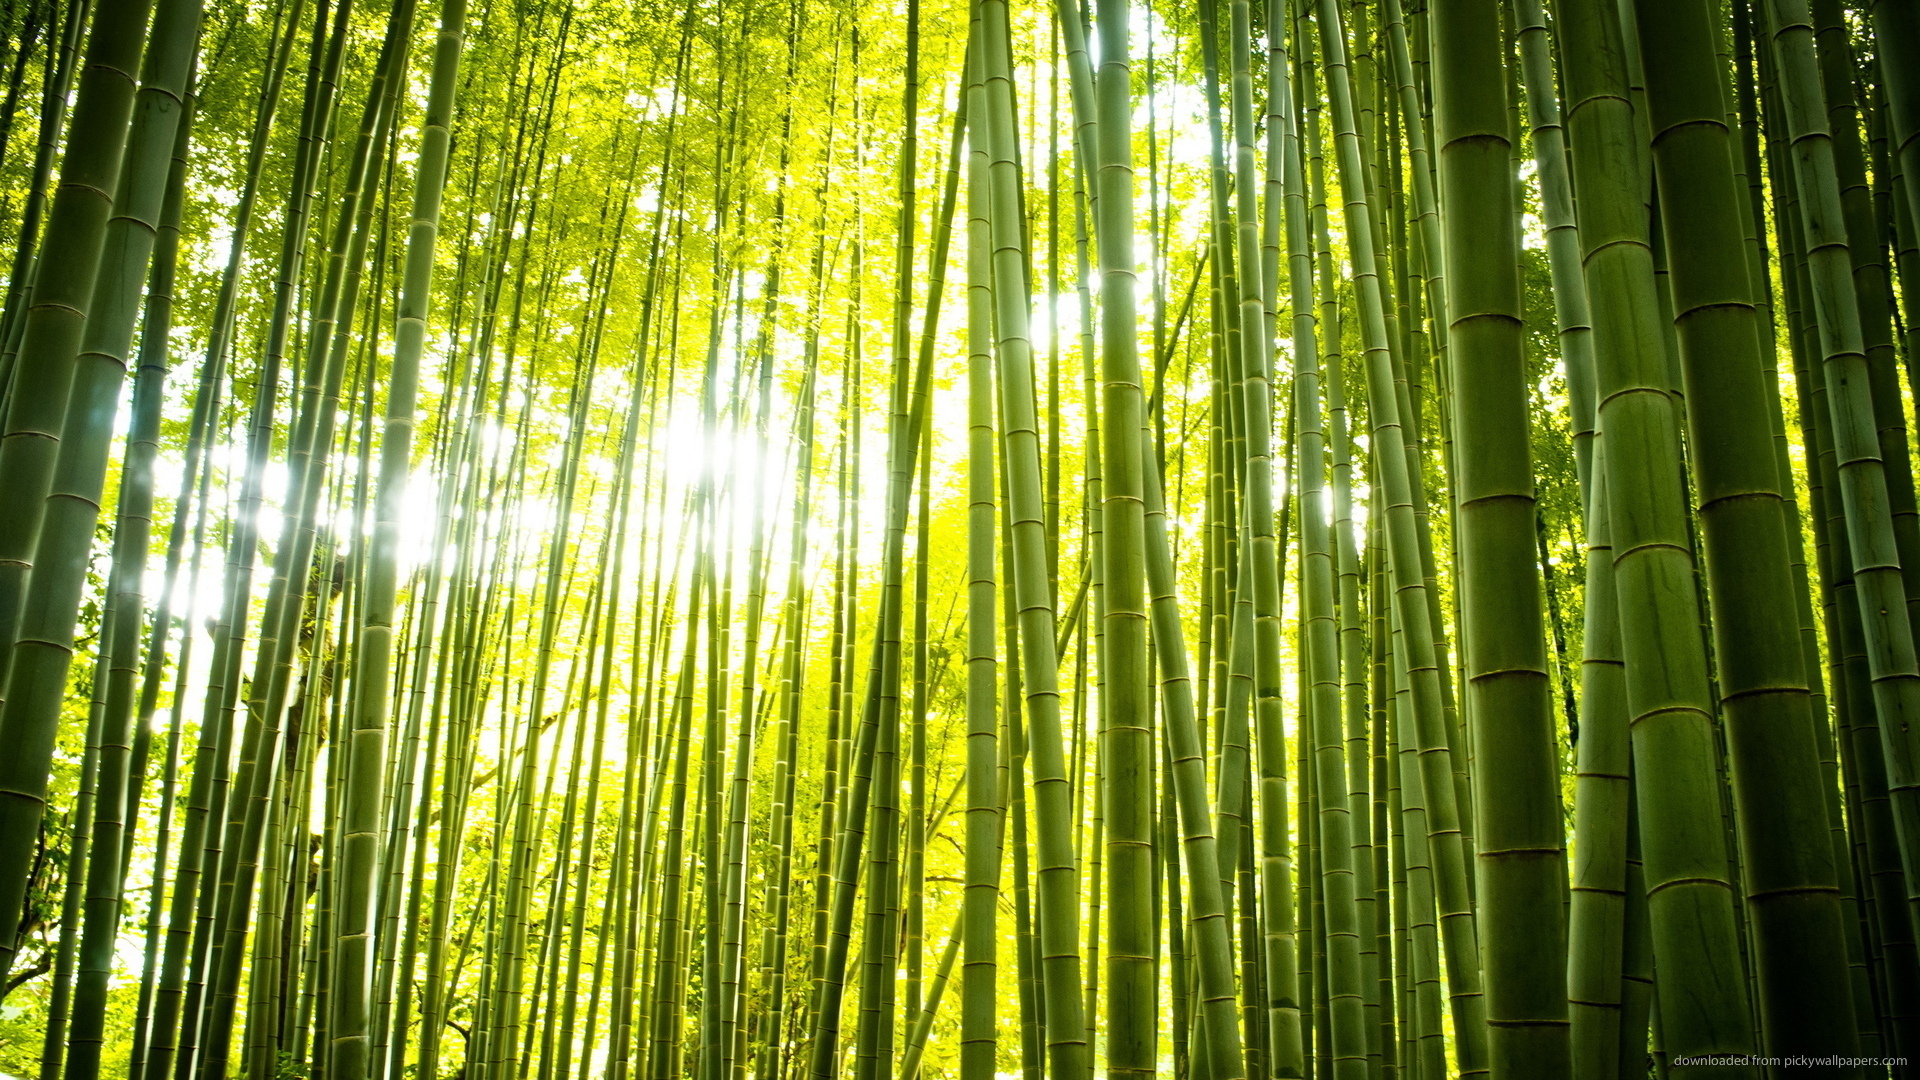 Wonderful Green Forest Bamboo Wallpaper Picture For iPhone Blackberry